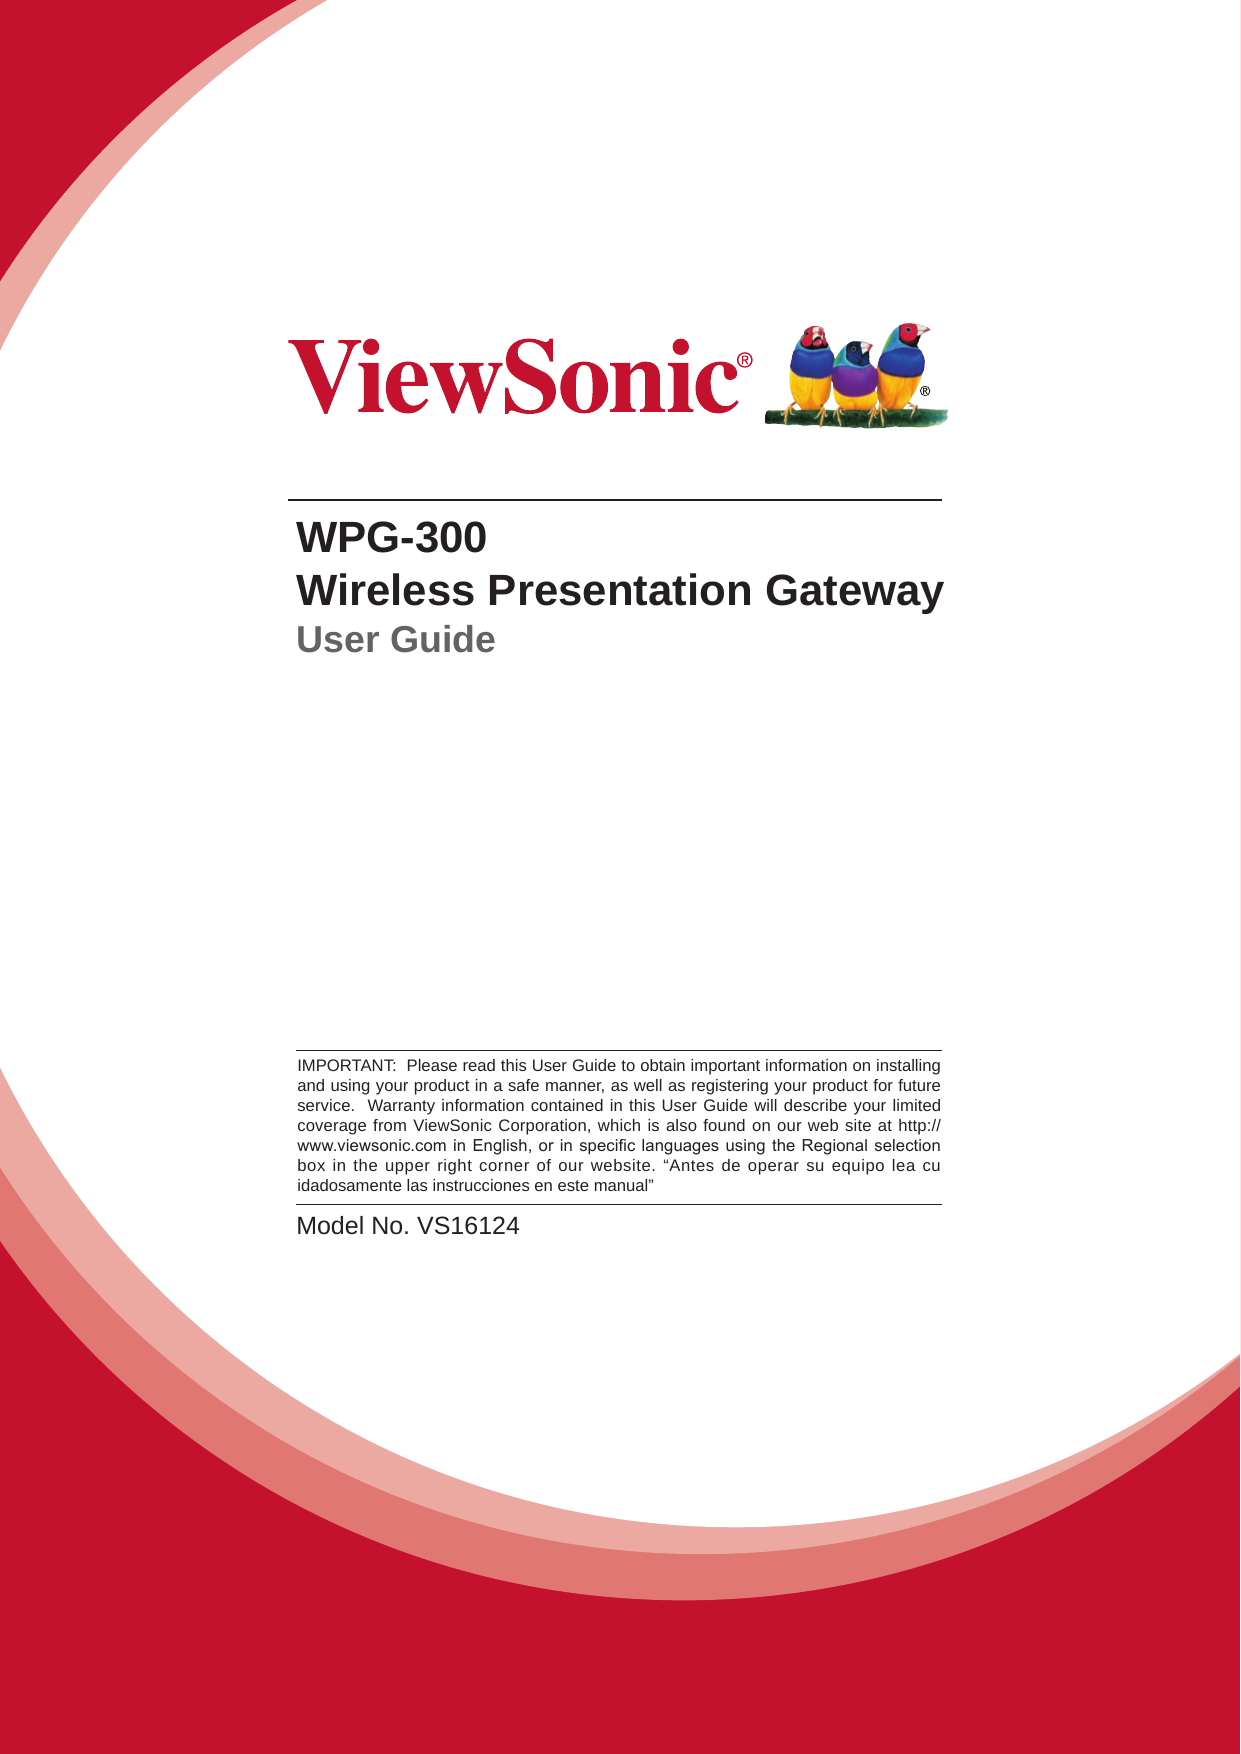 WPG-300Wireless Presentation GatewayUser GuideModel No. VS16124IMPORTANT:  Please read this User Guide to obtain important information on installing and using your product in a safe manner, as well as registering your product for future service.  Warranty information contained in this User Guide will describe your limited coverage from ViewSonic Corporation, which is also found on our web site at http://www.viewsonic.com in English, or in specic languages using the Regional selection box in the upper right corner of our website. “Antes de operar su equipo lea cu idadosamente las instrucciones en este manual”